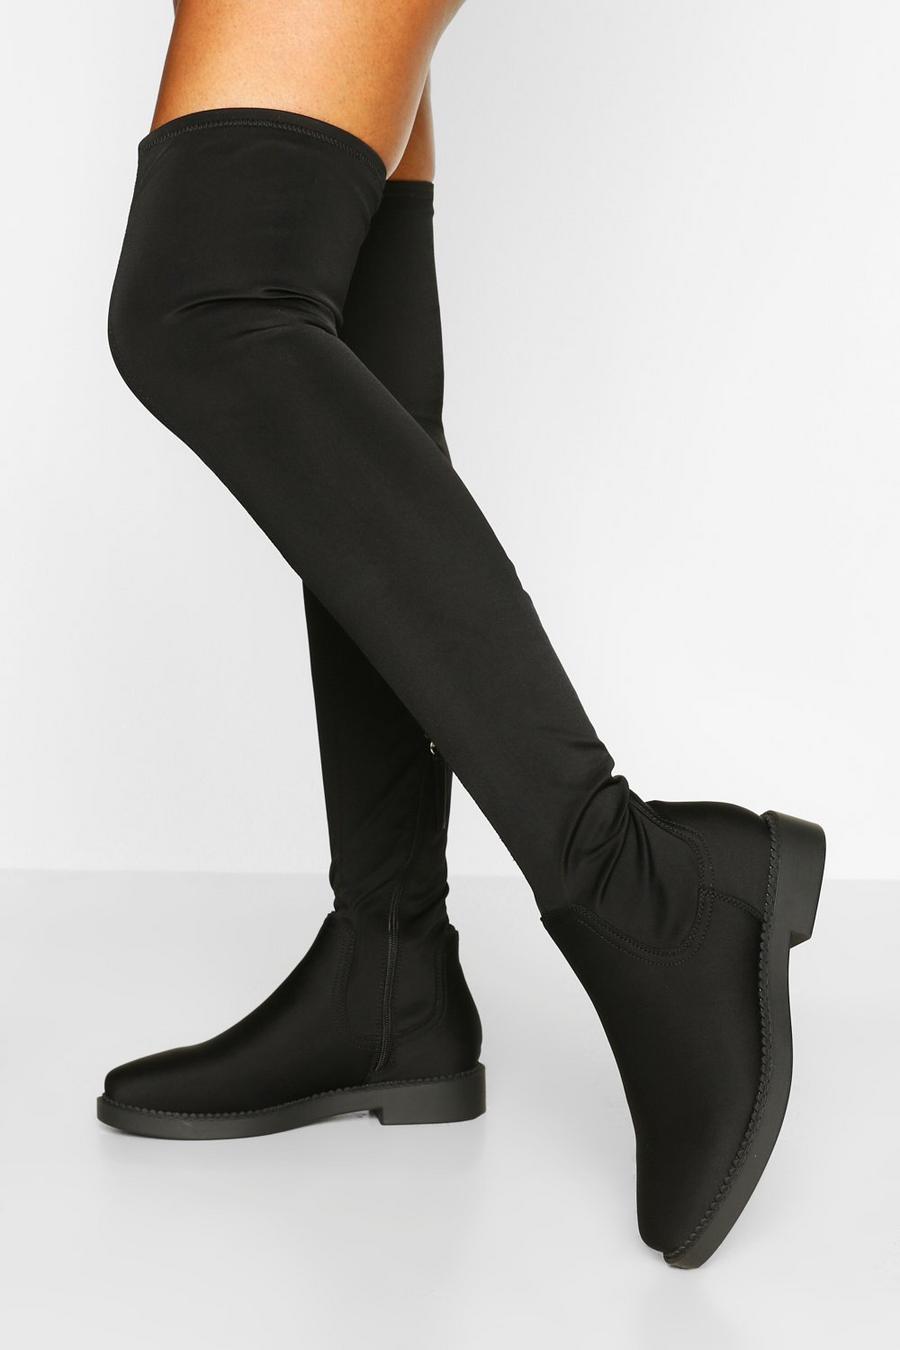 Black Flat Stretch Over The Knee Boots image number 1